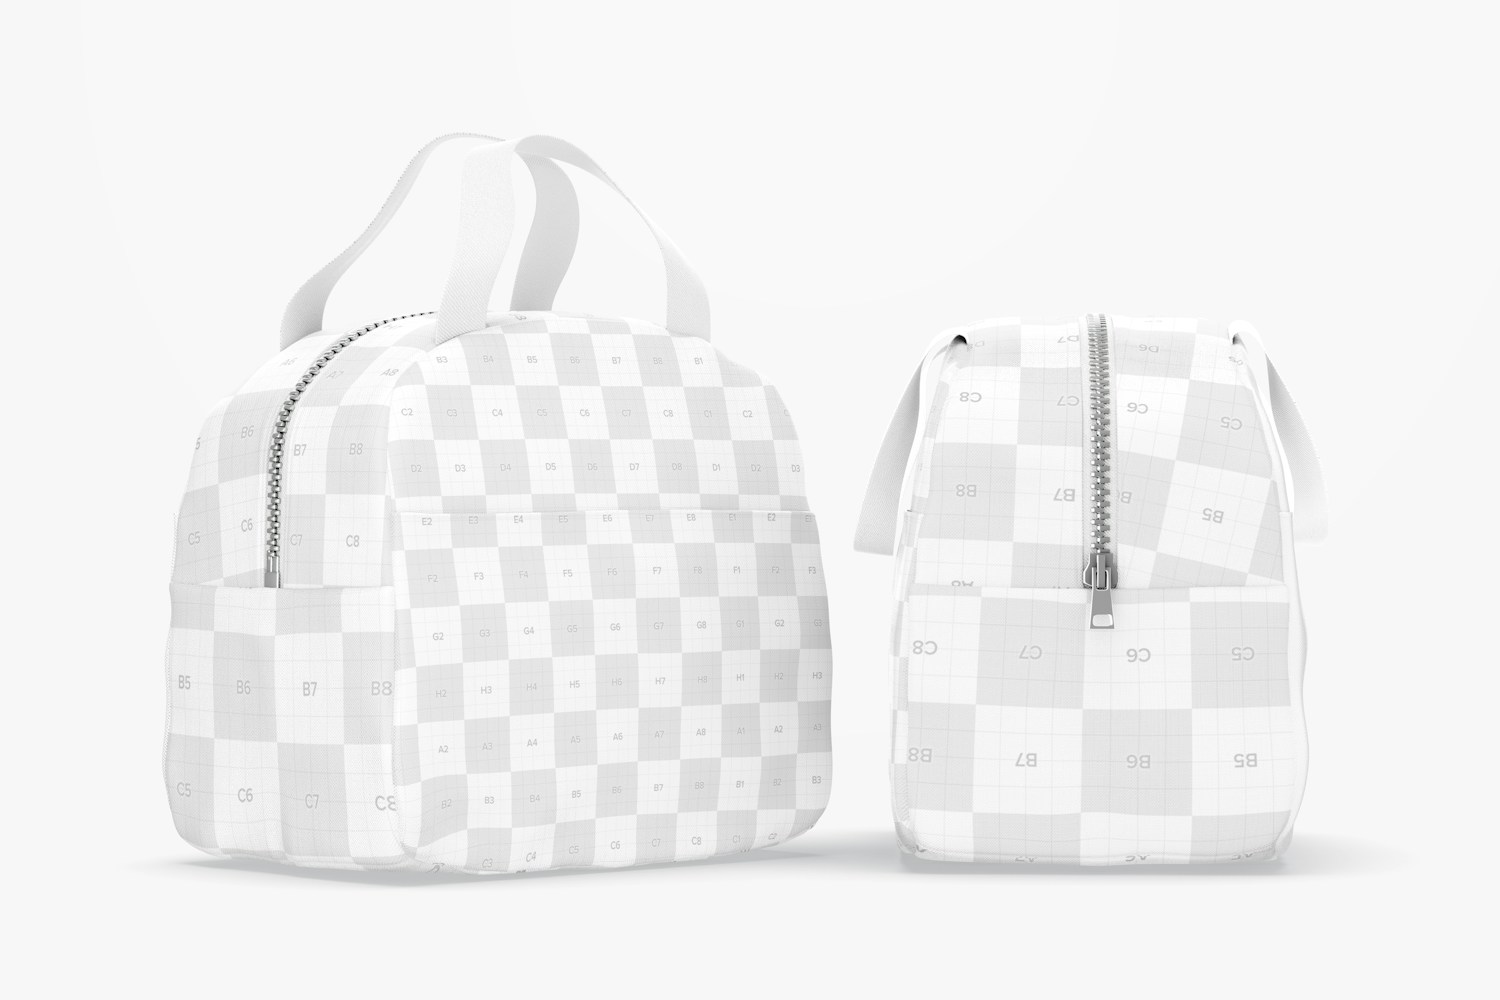 Lunch Bags with Front Pocket Mockup